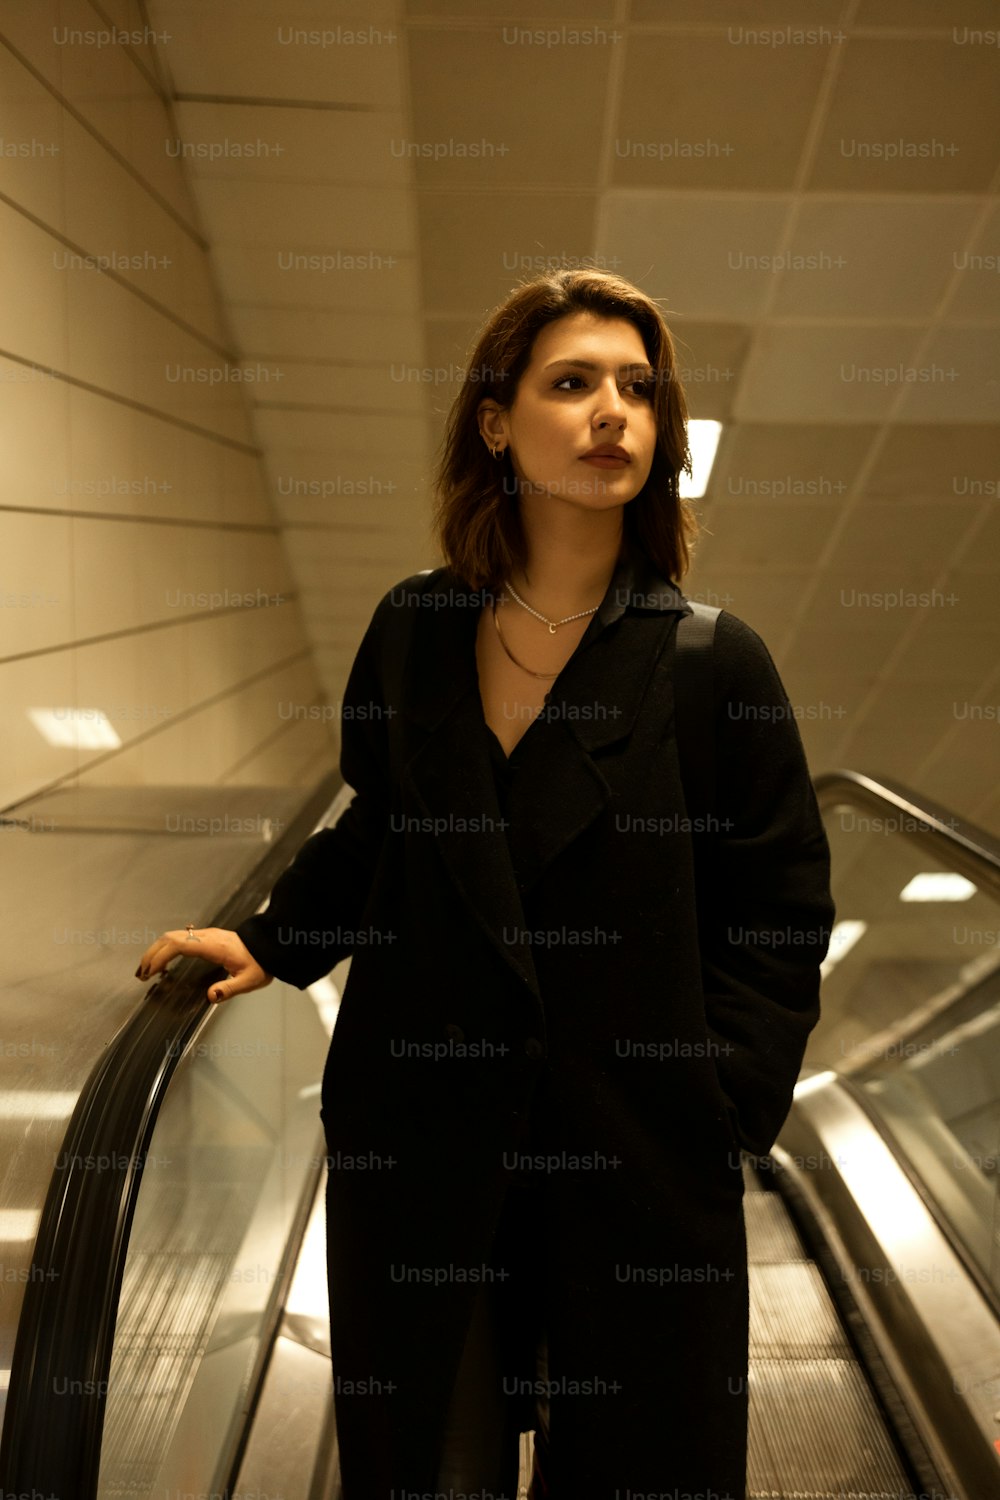 a woman standing on an escalator in a building